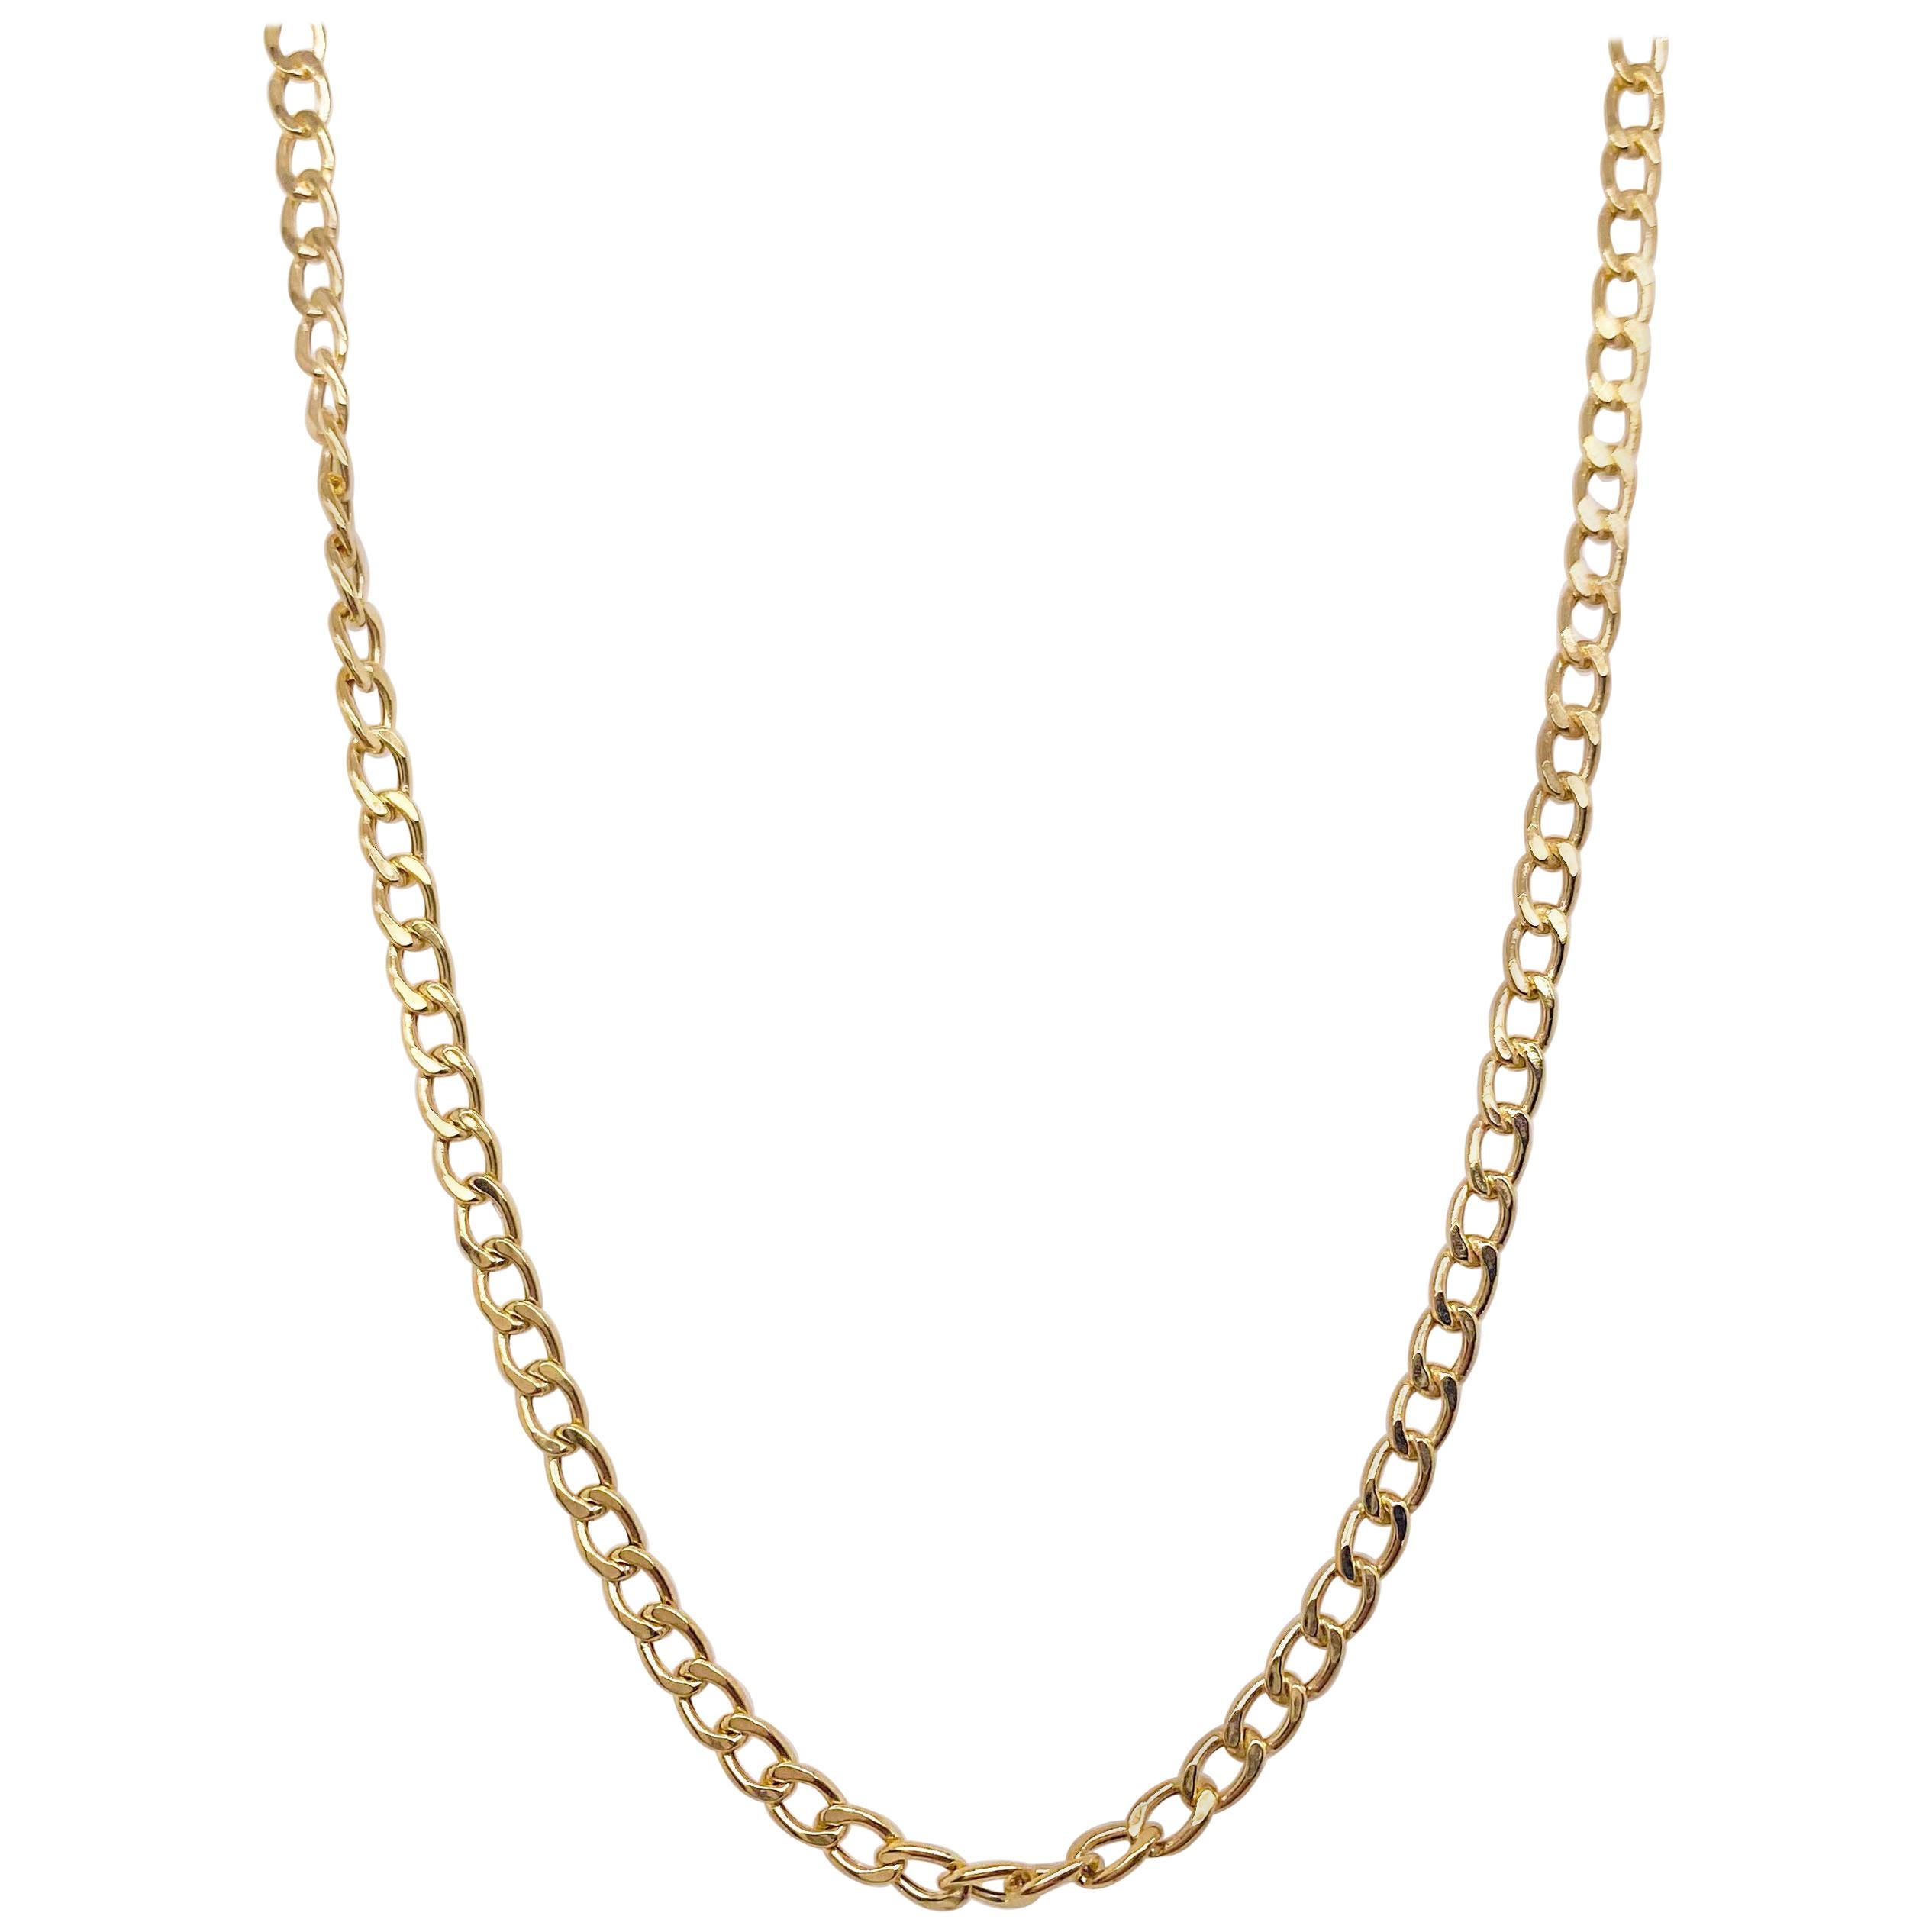 Cable Chain Necklace, 14 Karat Yellow Gold